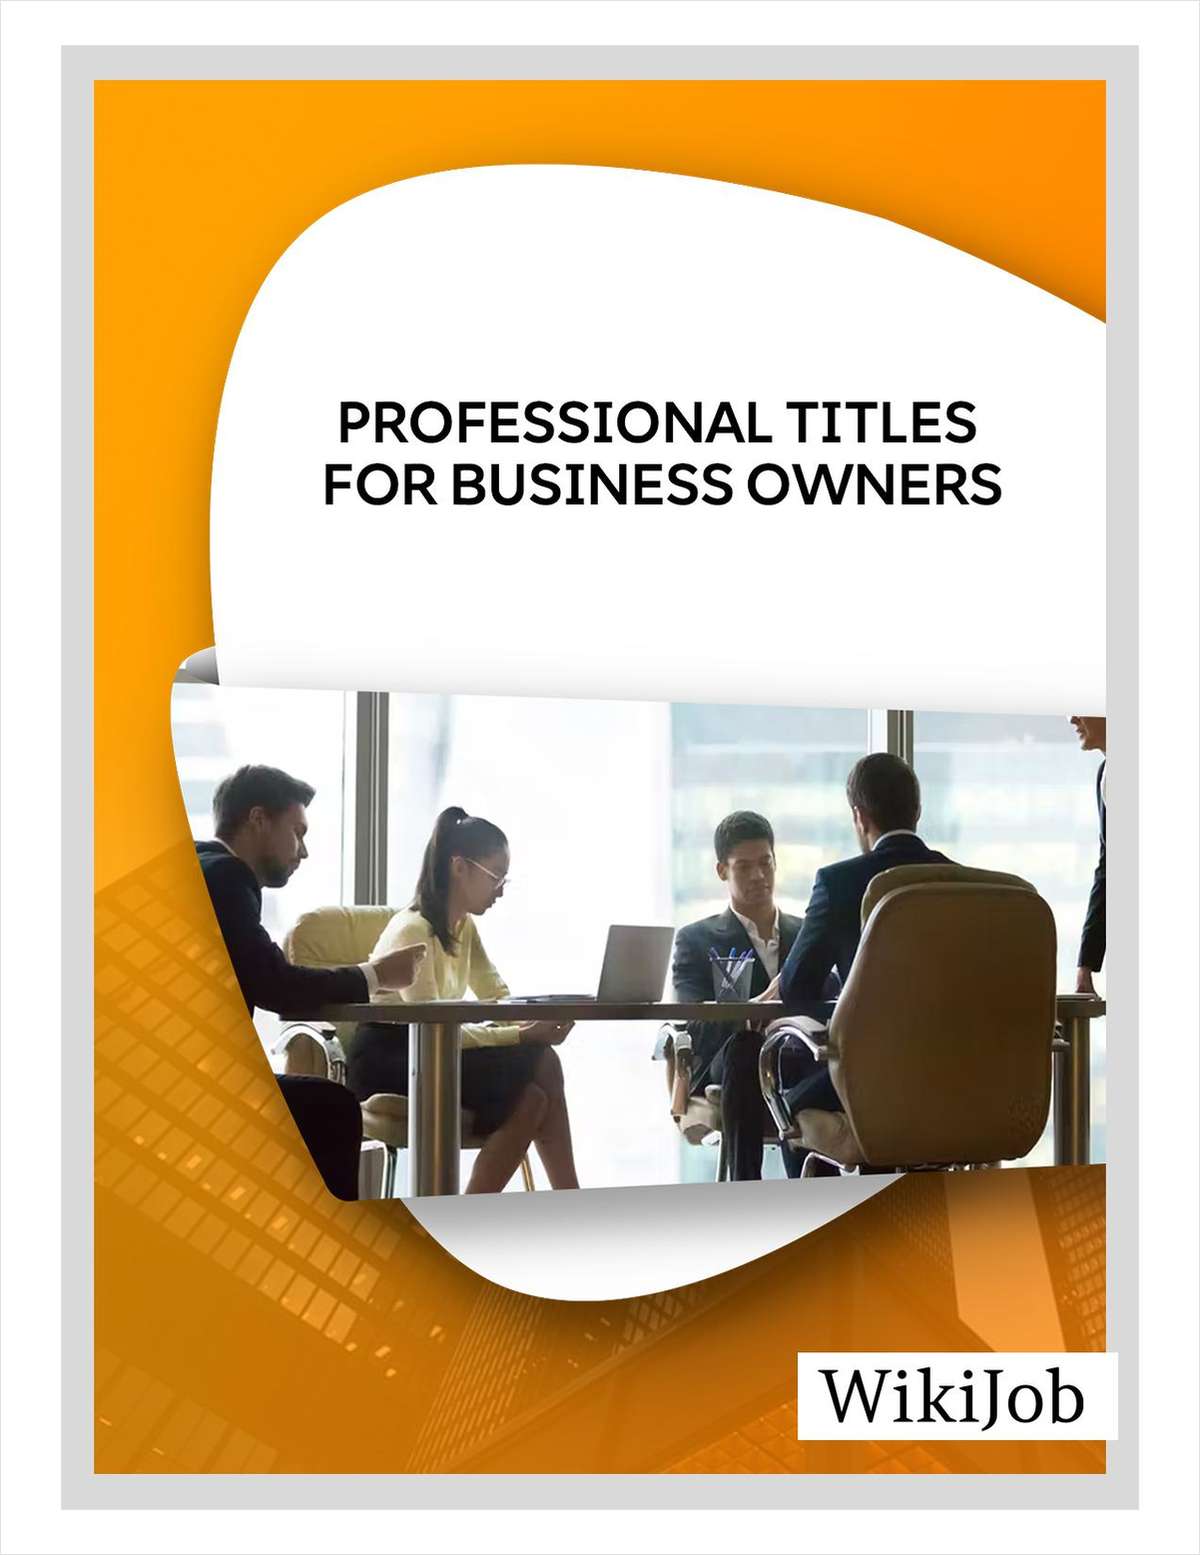 Professional Titles for Business Owners